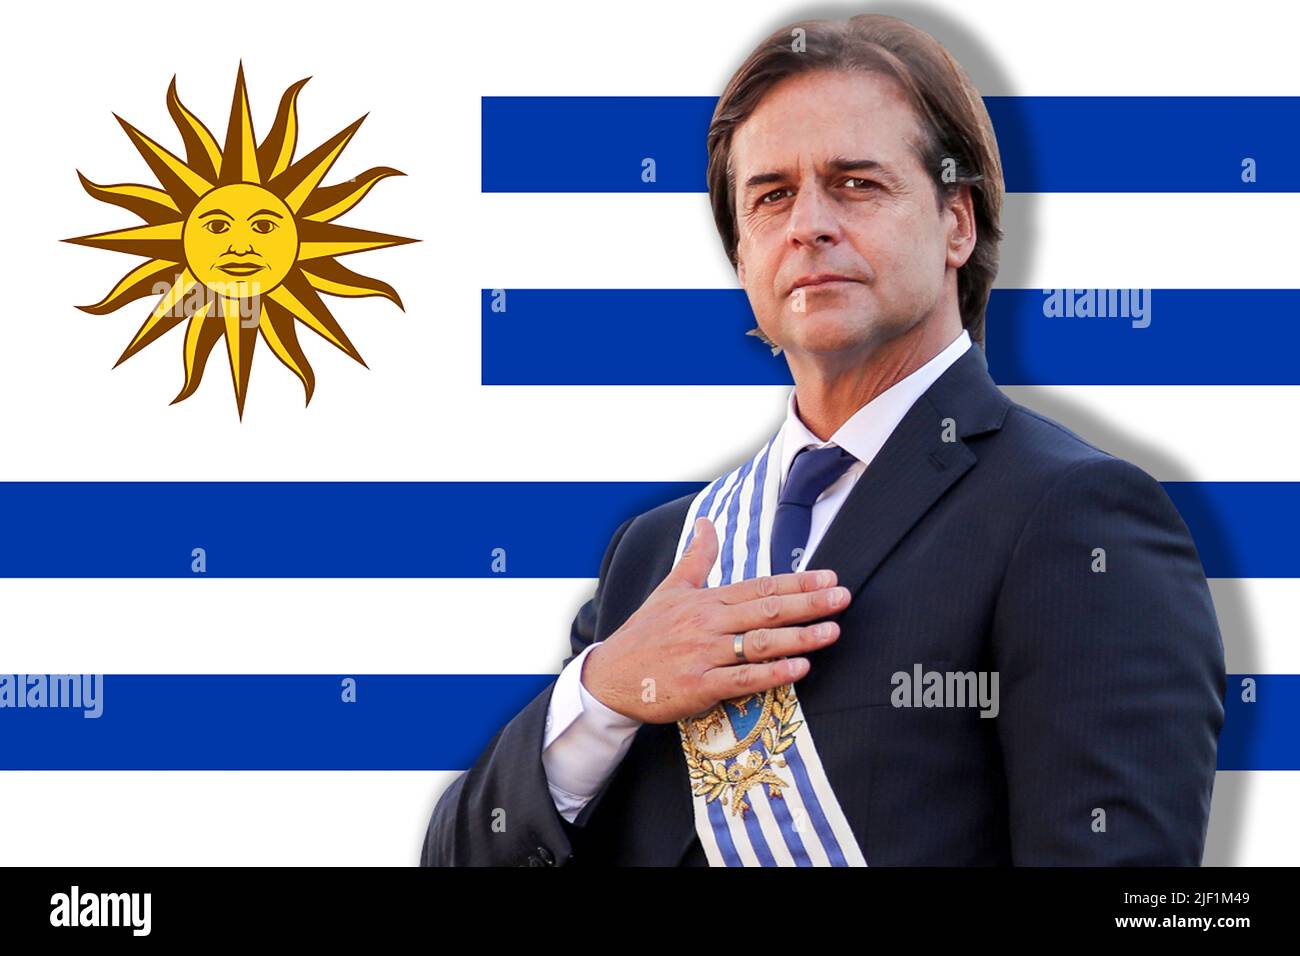 Luis Lacalle Pou and the flag of Uruguay Stock Photo